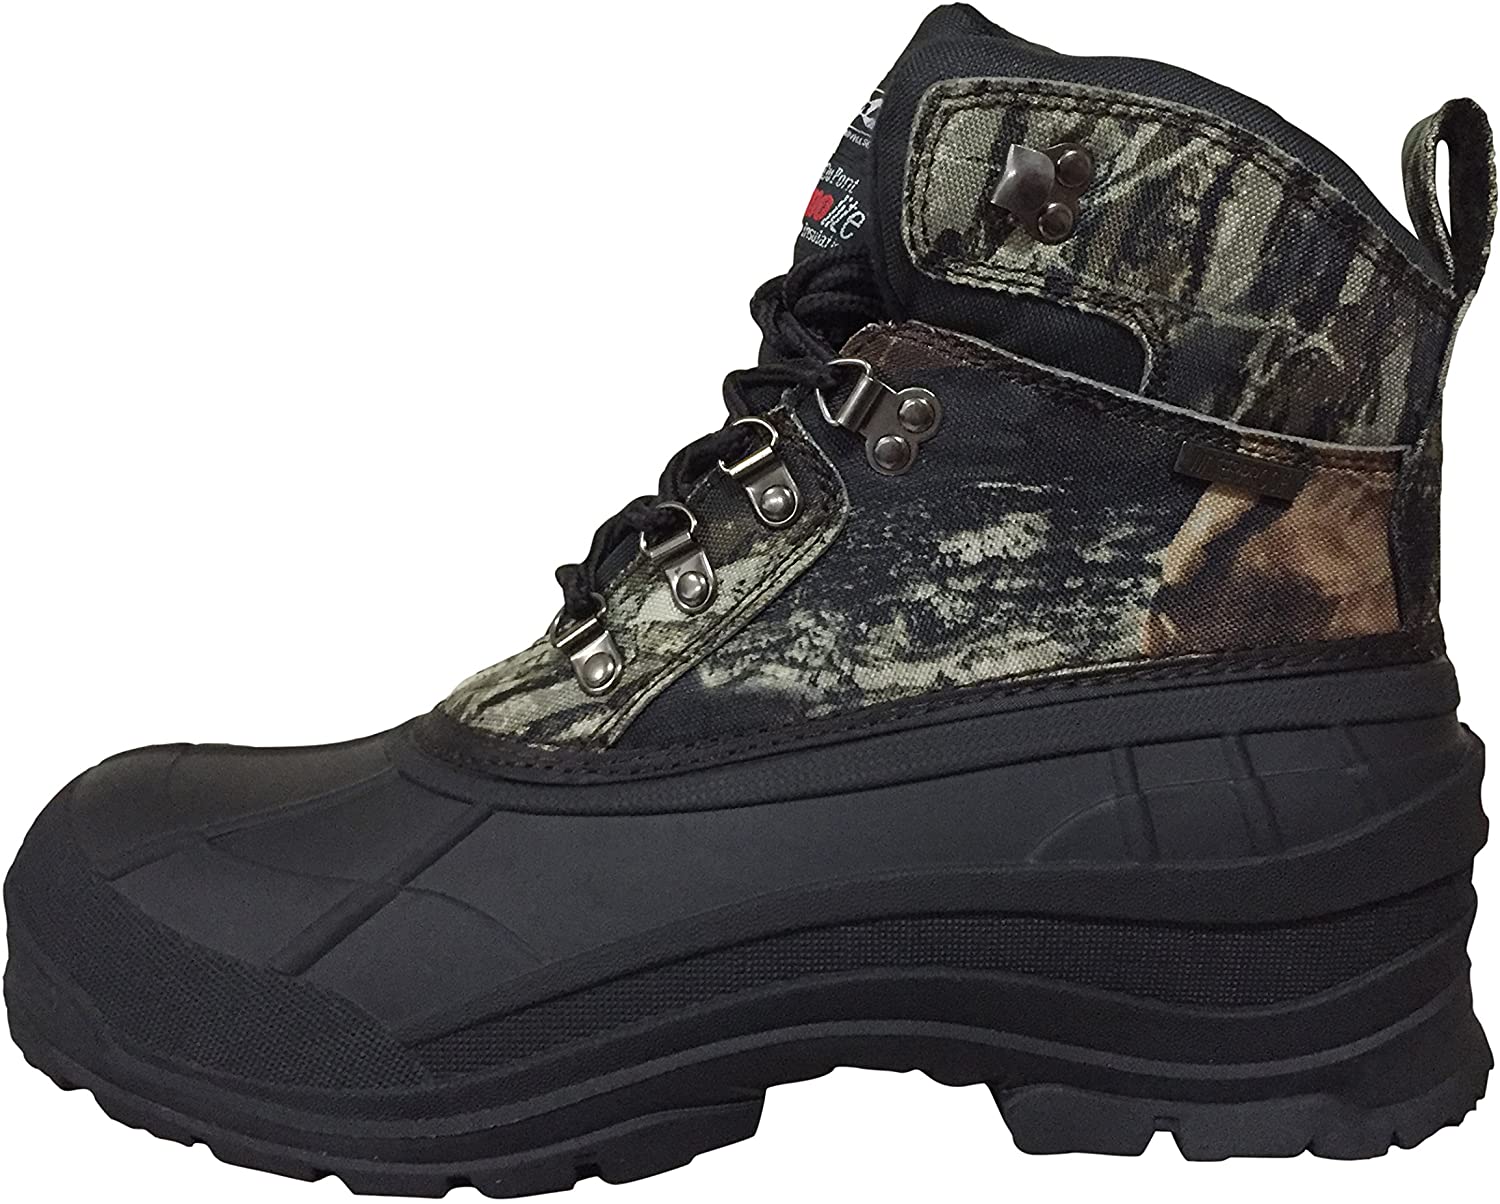 Men's Winter Snow Boots Camouflage Thermolite Insulated Hunting Shoes - image 5 of 5